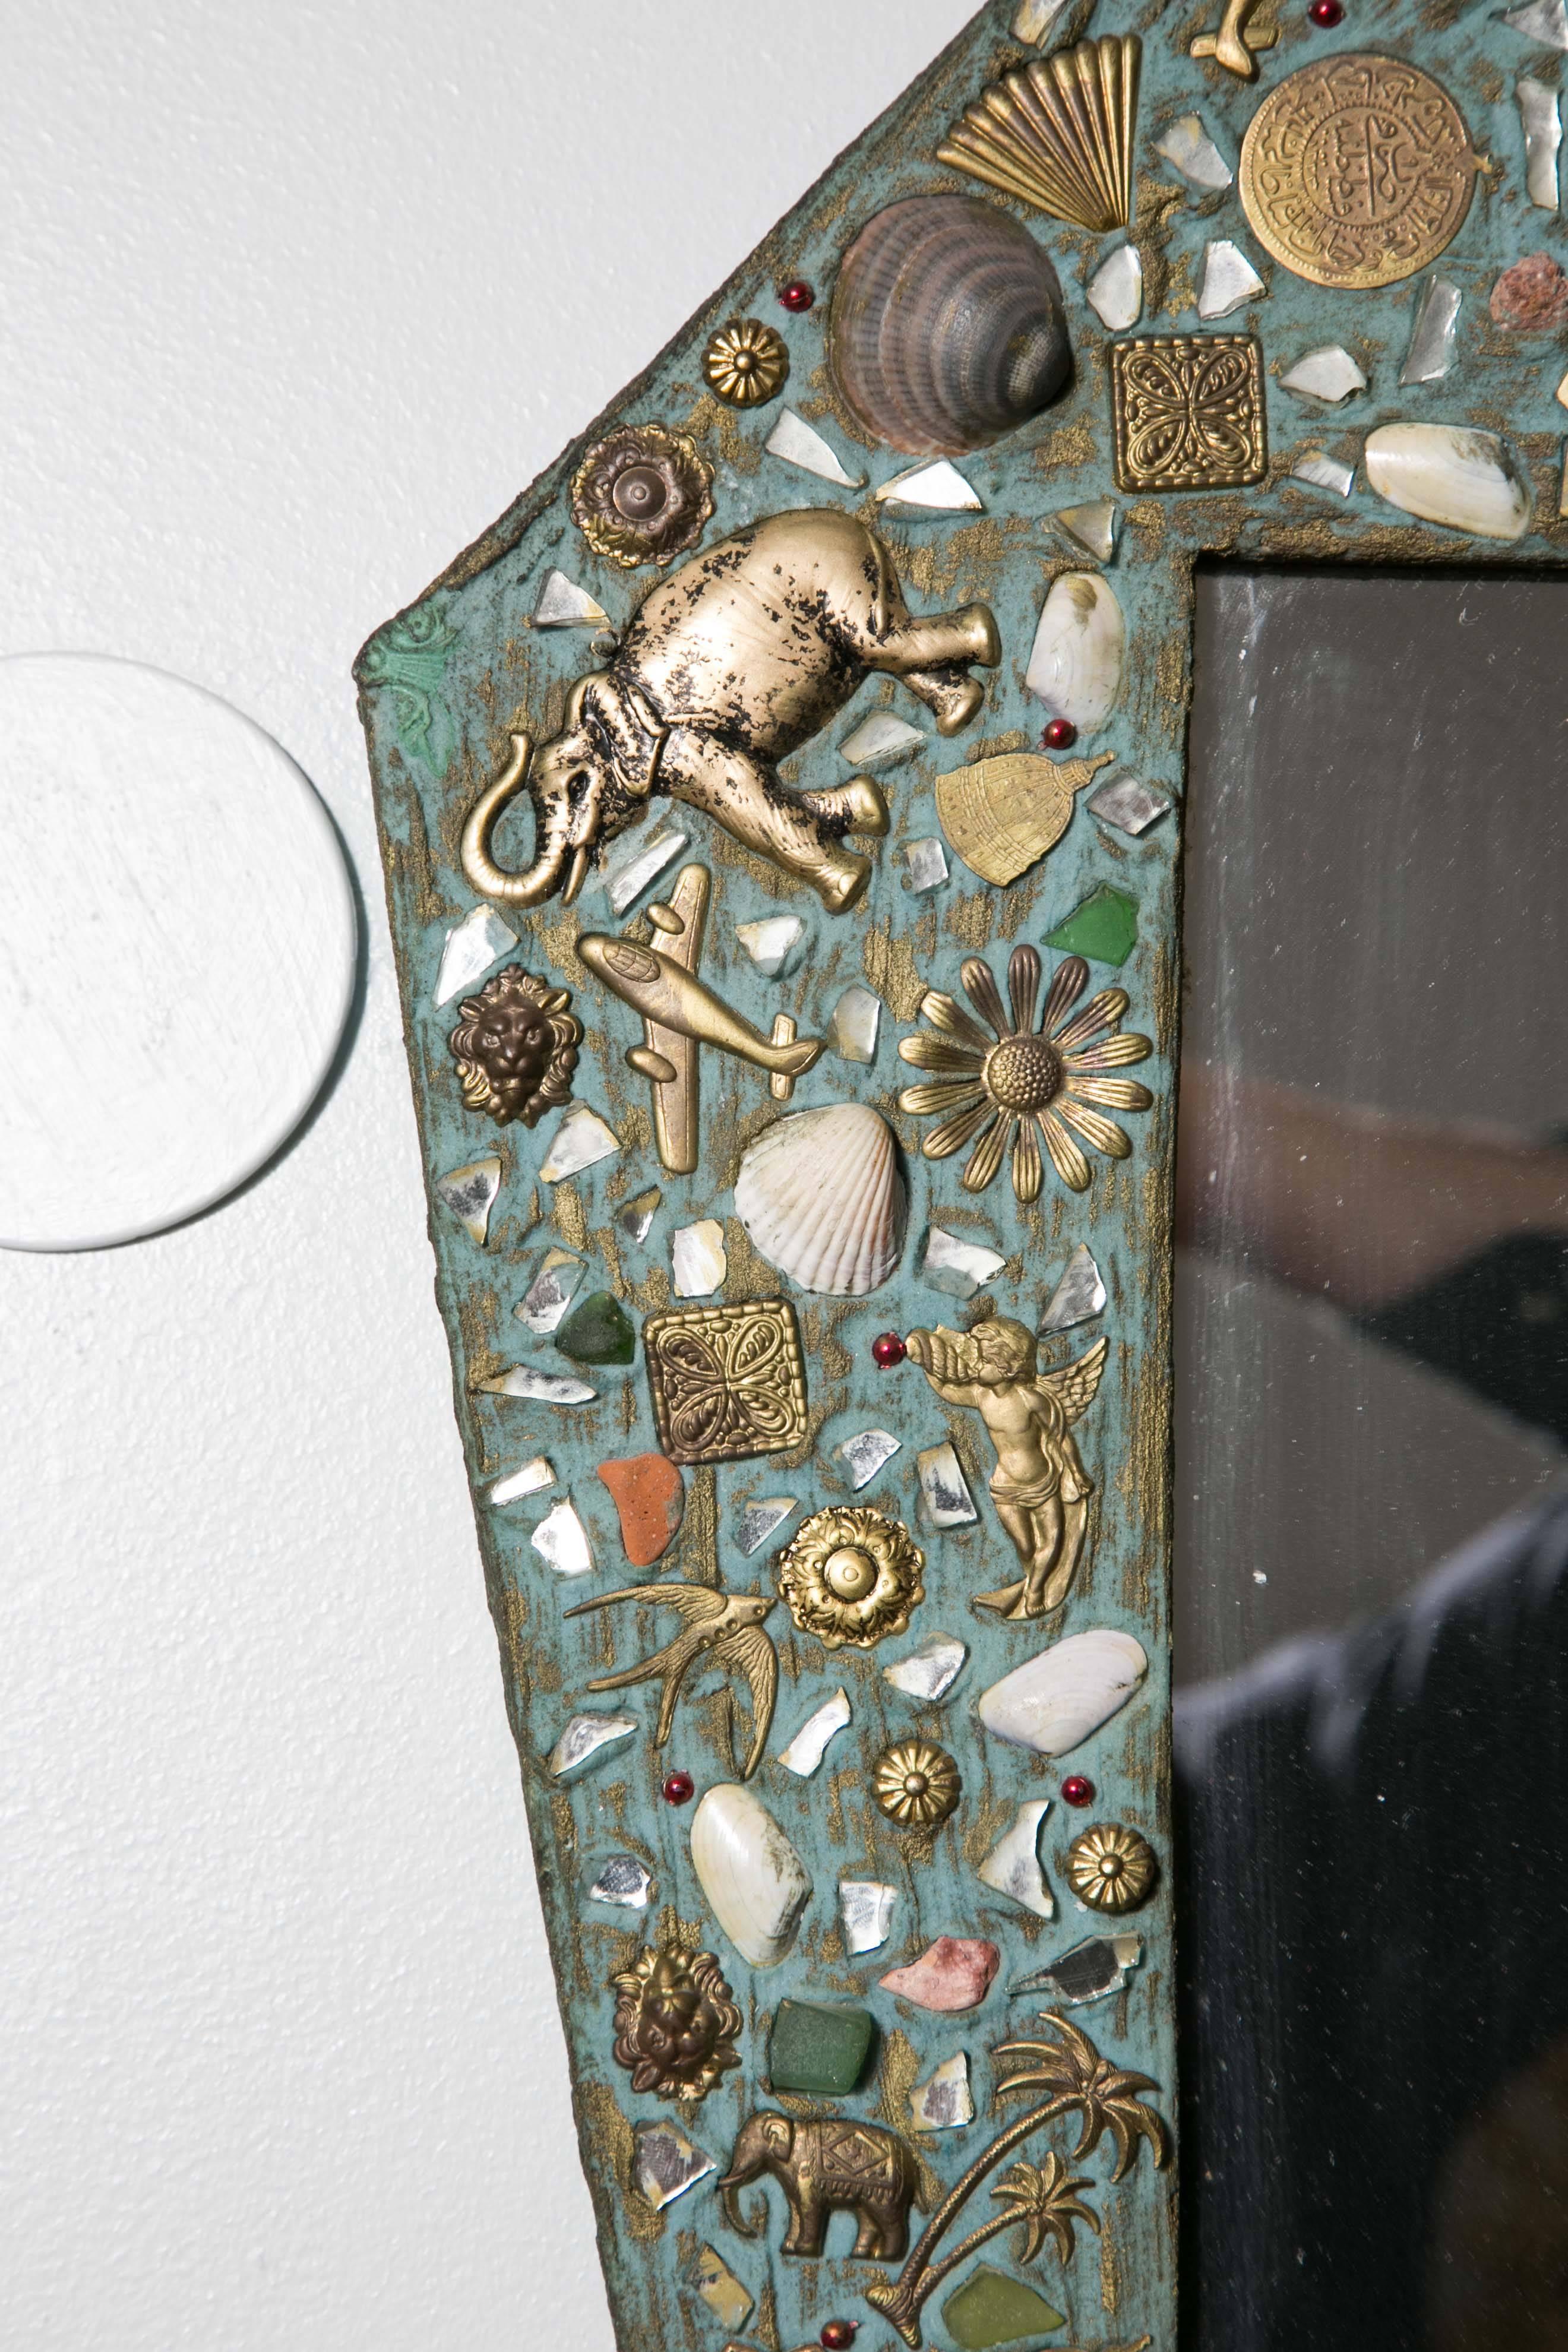 Mirror in resin with full of small pieces, decorations, shells and glass.
Base in wood,
In style of Anthony Redmile,
circa 1960.